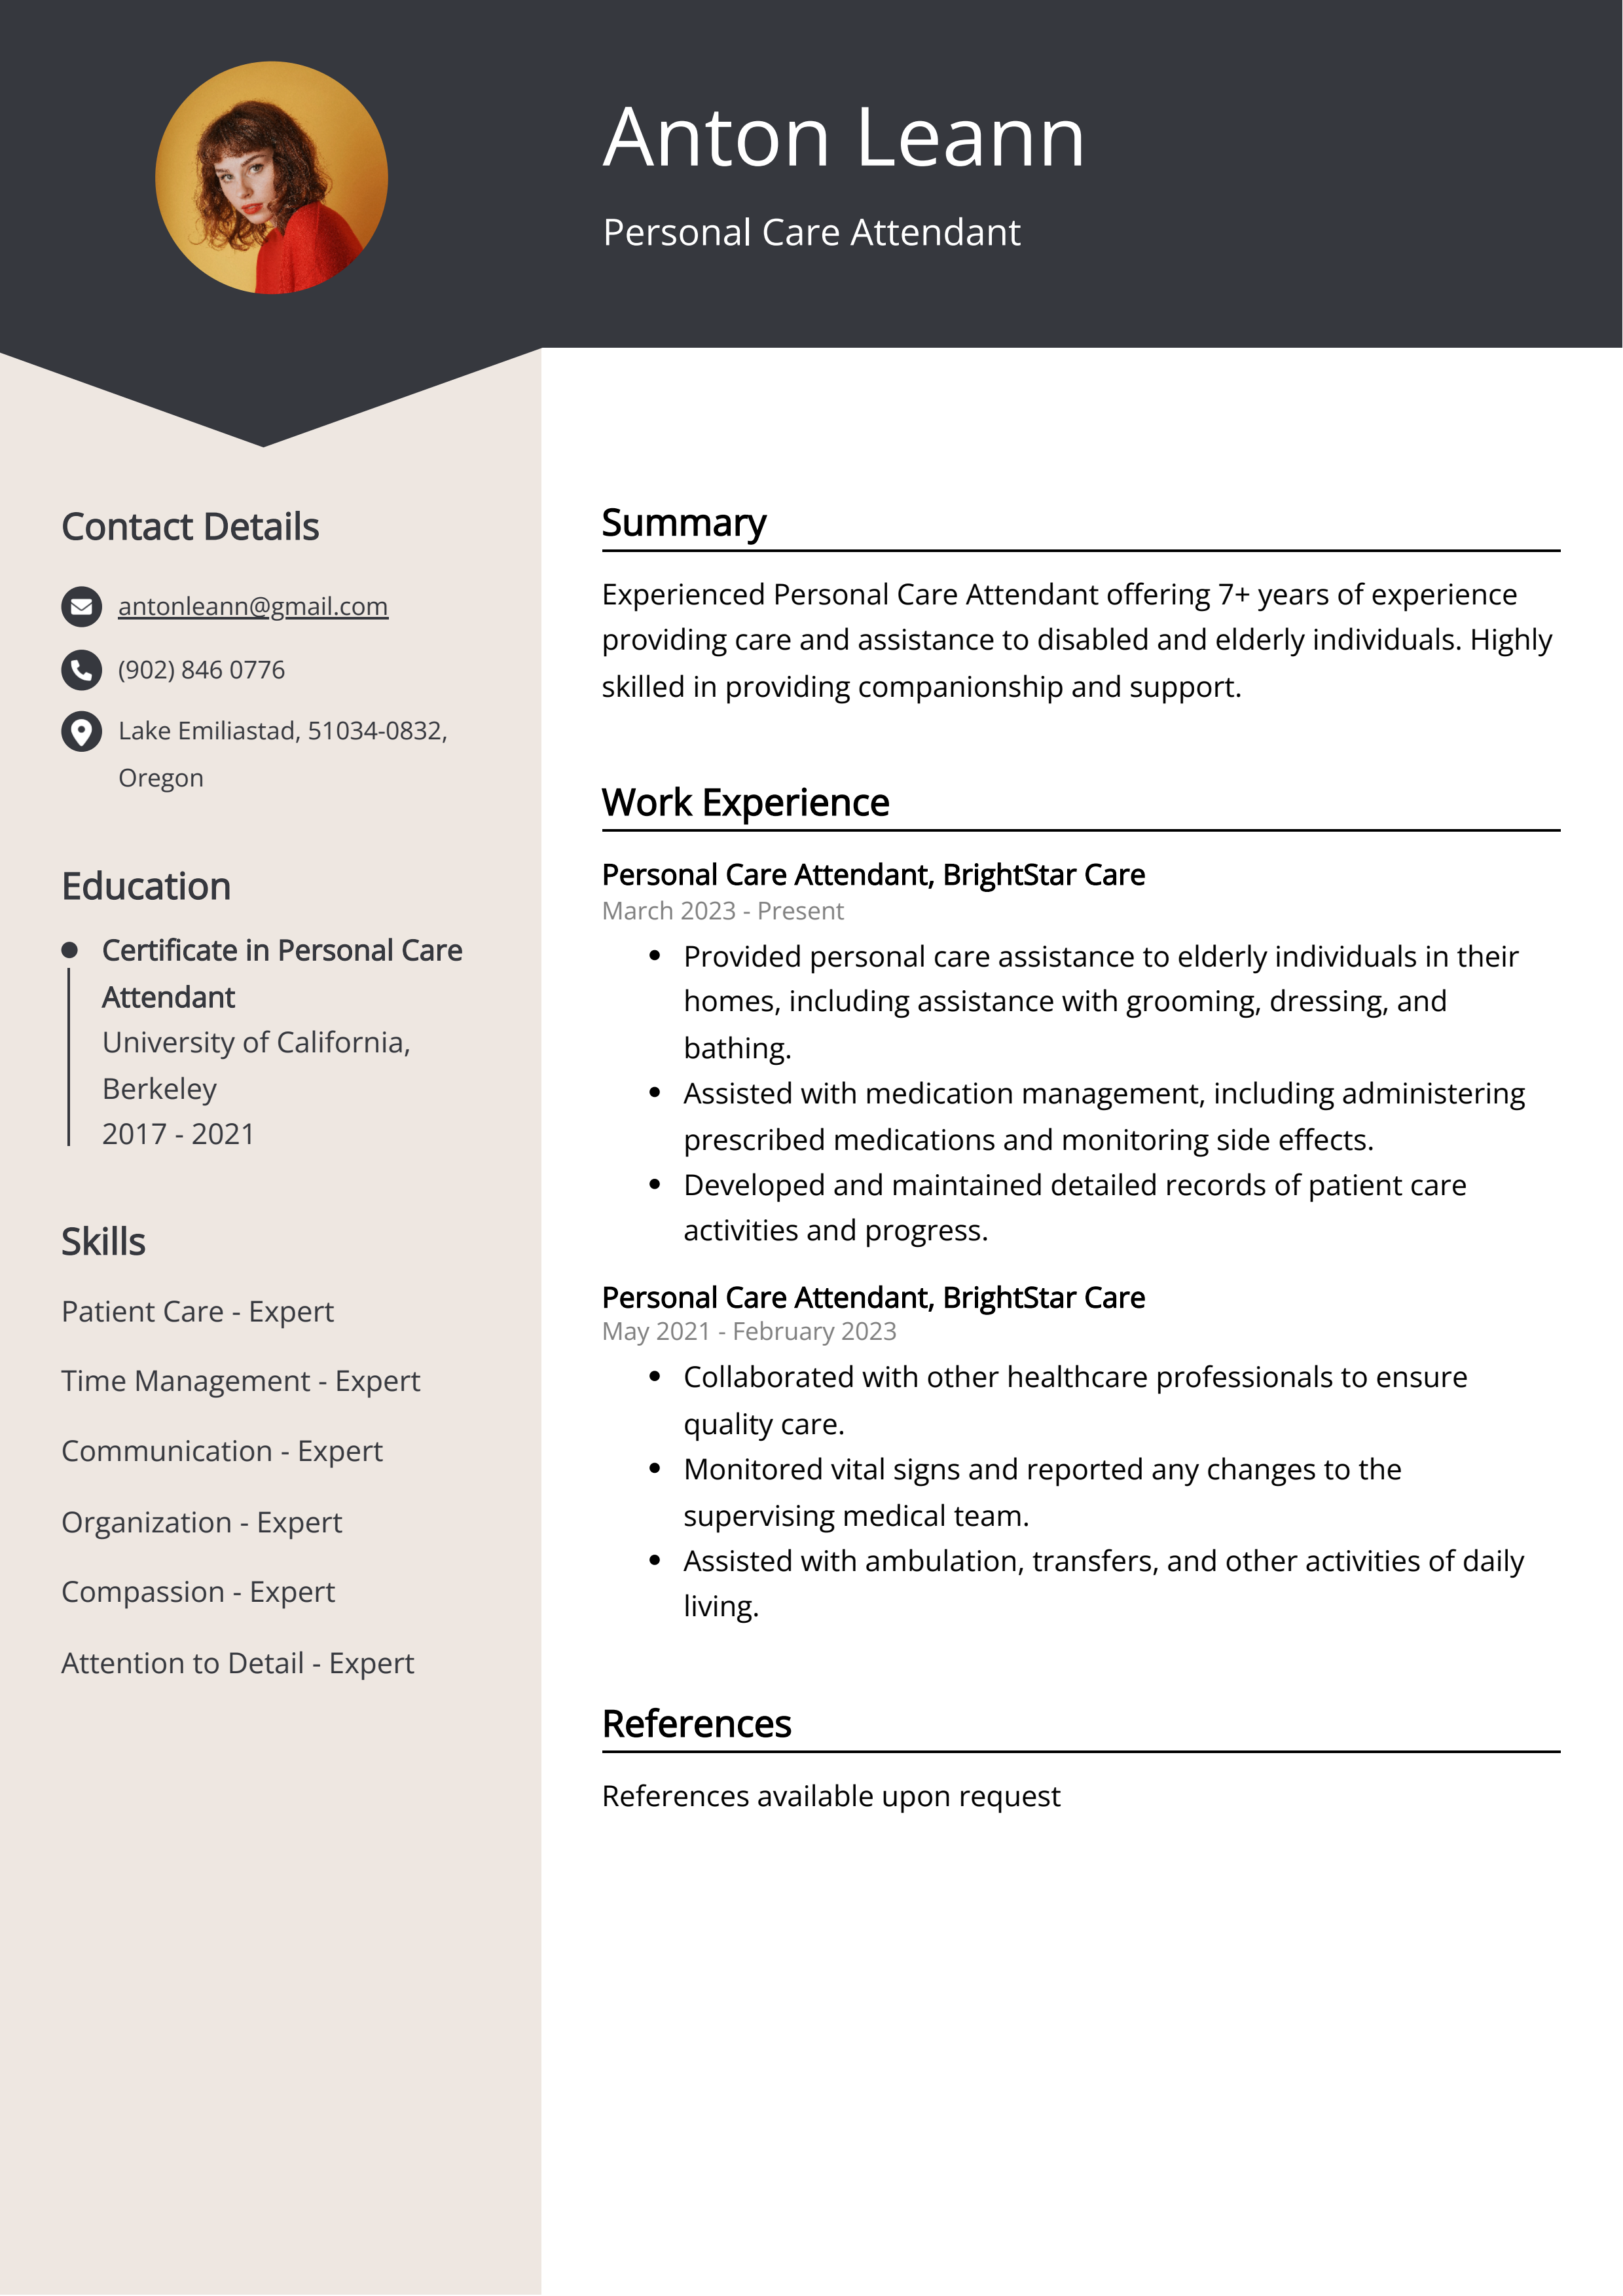 Personal Care Attendant CV Example